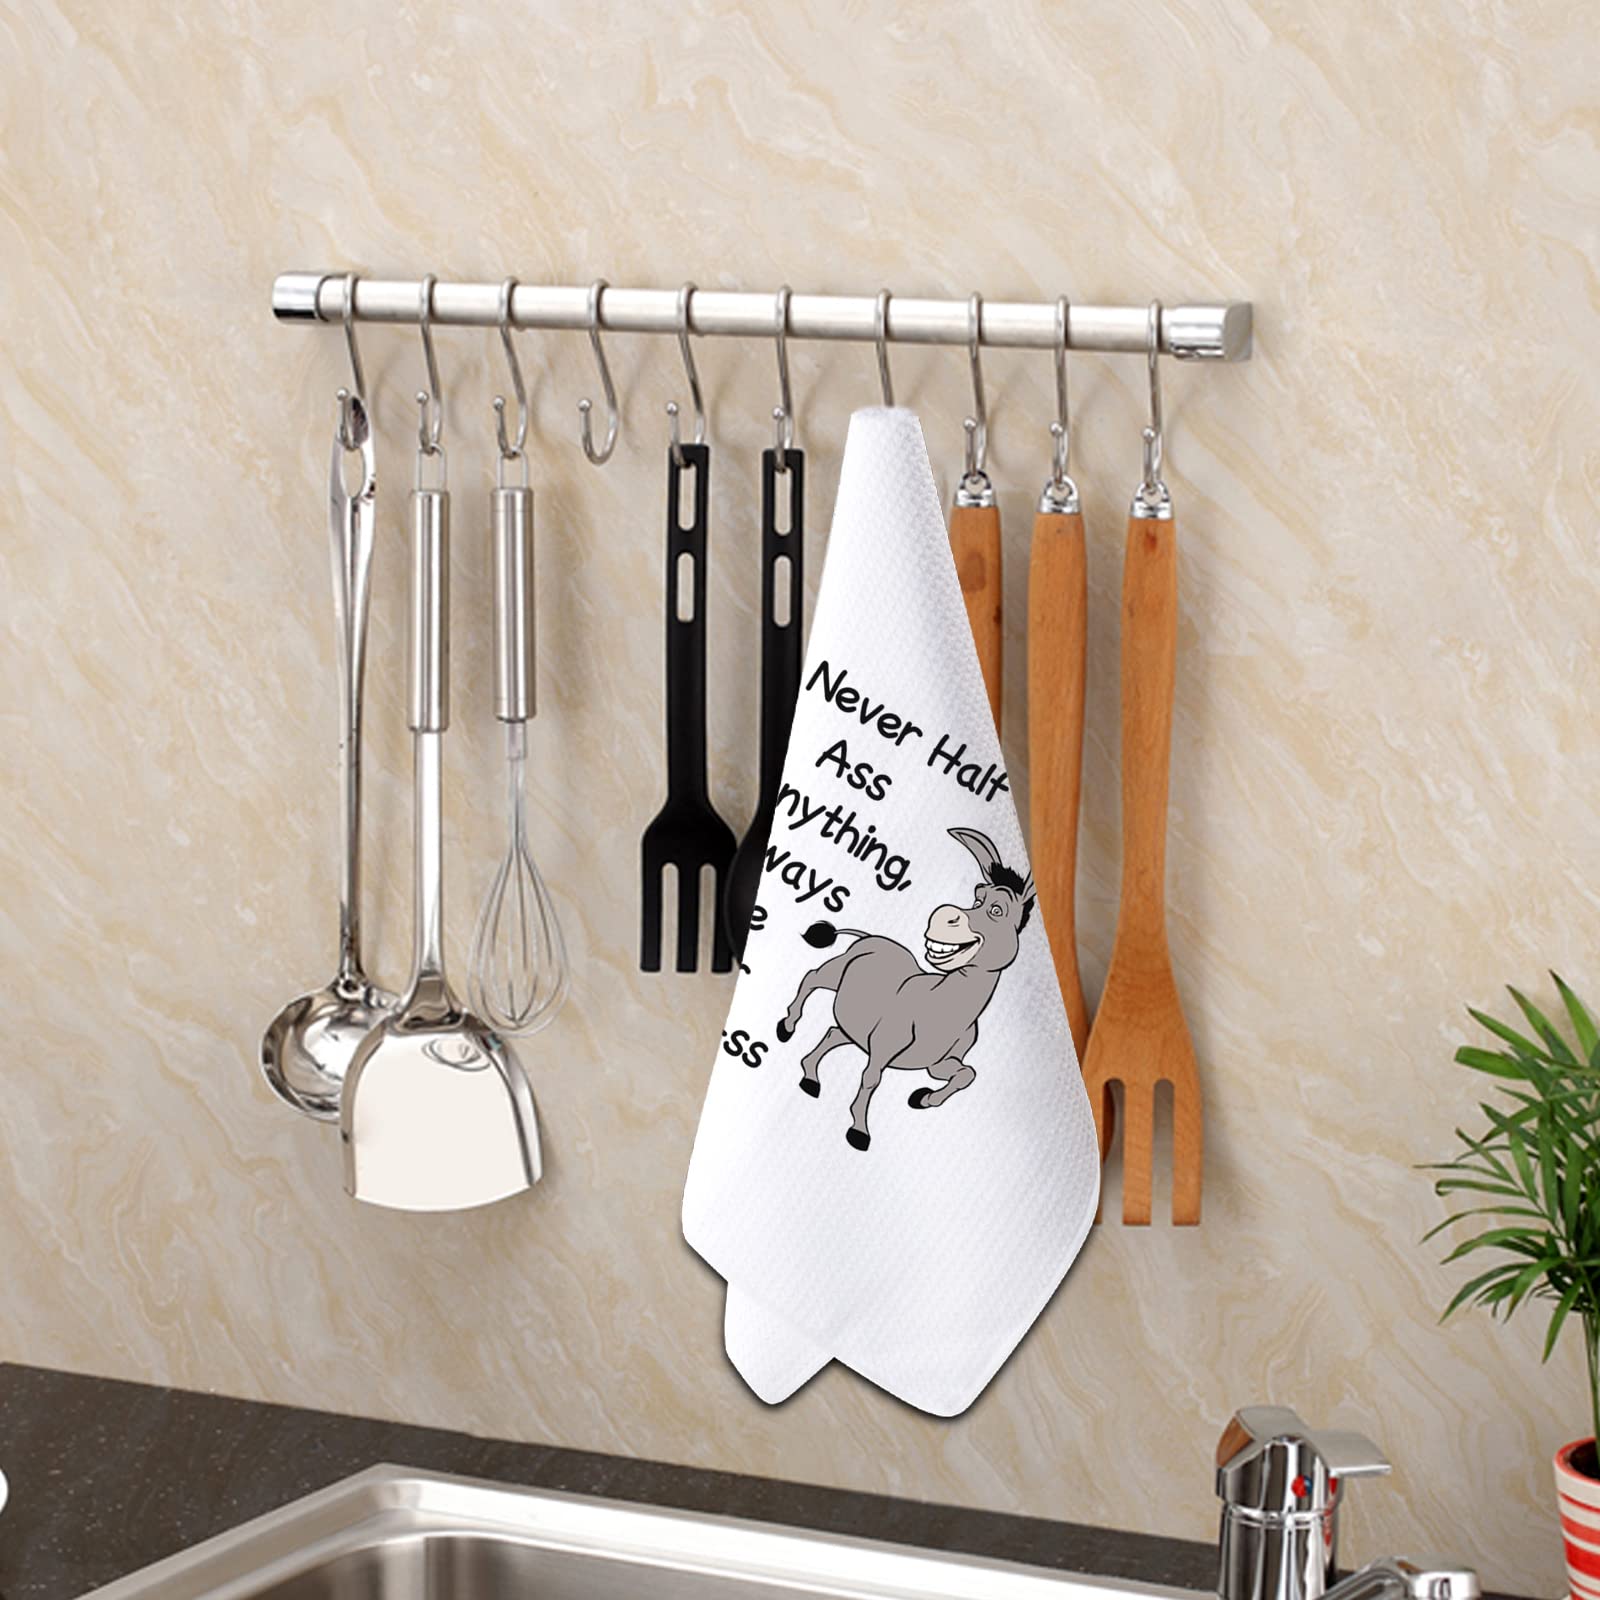 PXTIDY Funny Donkey Gift Never Half Ass Anything Always Use Your Full Ass Donkey Funny Kitchen Bar Tea Towels Friend Coworker Sarcasm Gag Gift